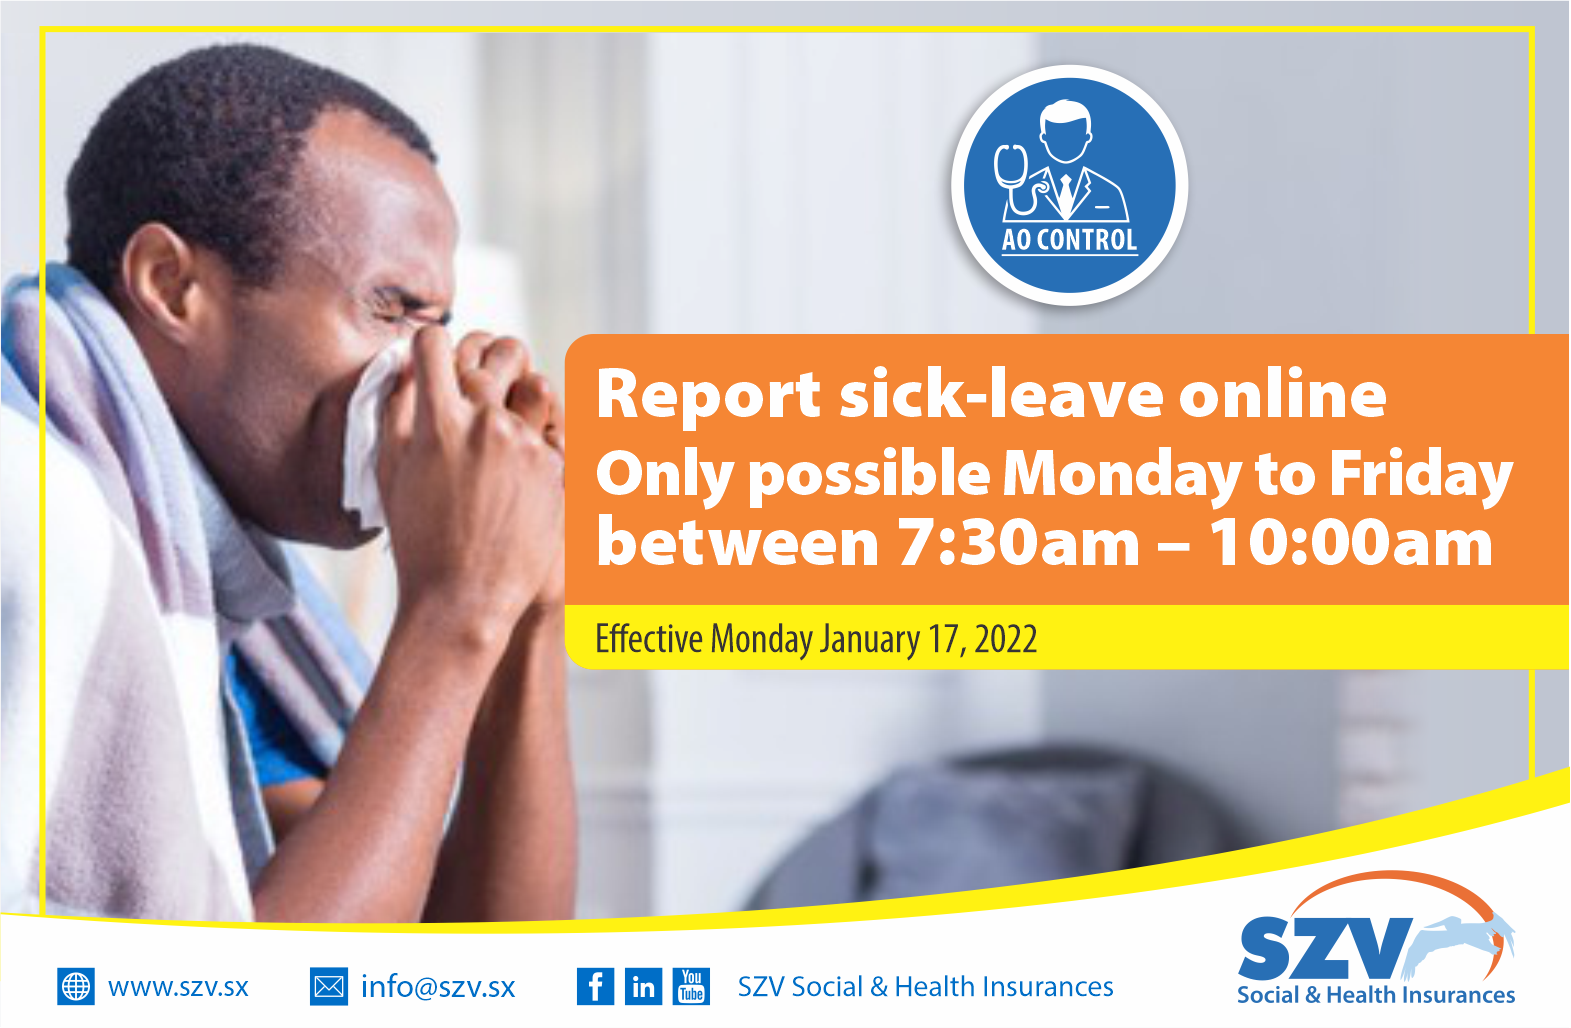 Adjusted times to report sick leave online